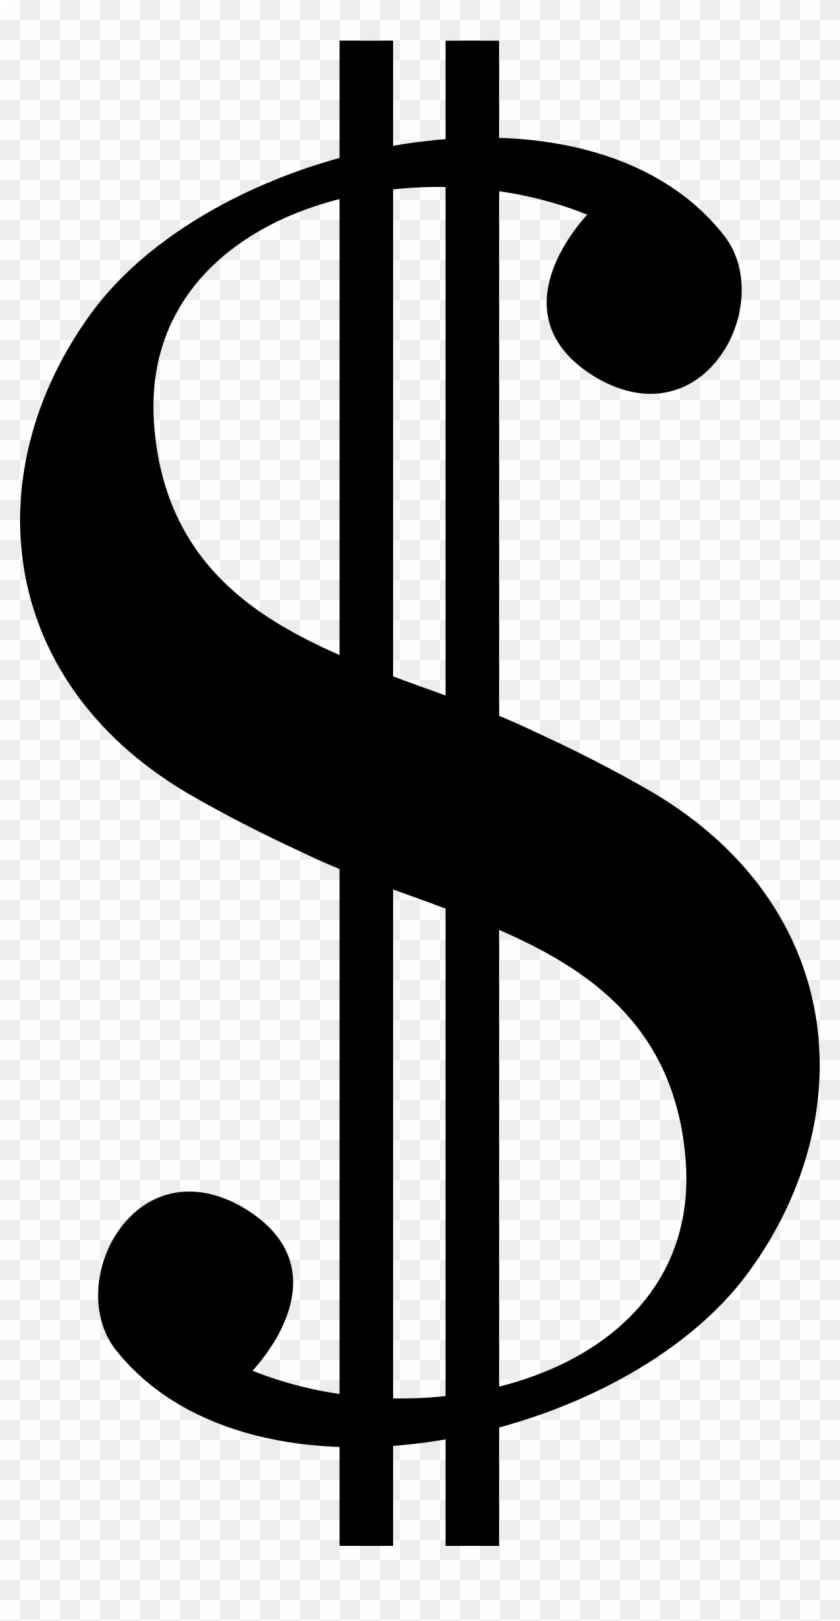 This Free Icons Png Design Of Dollar Sign Serif - Money Sign Clip Art #252300